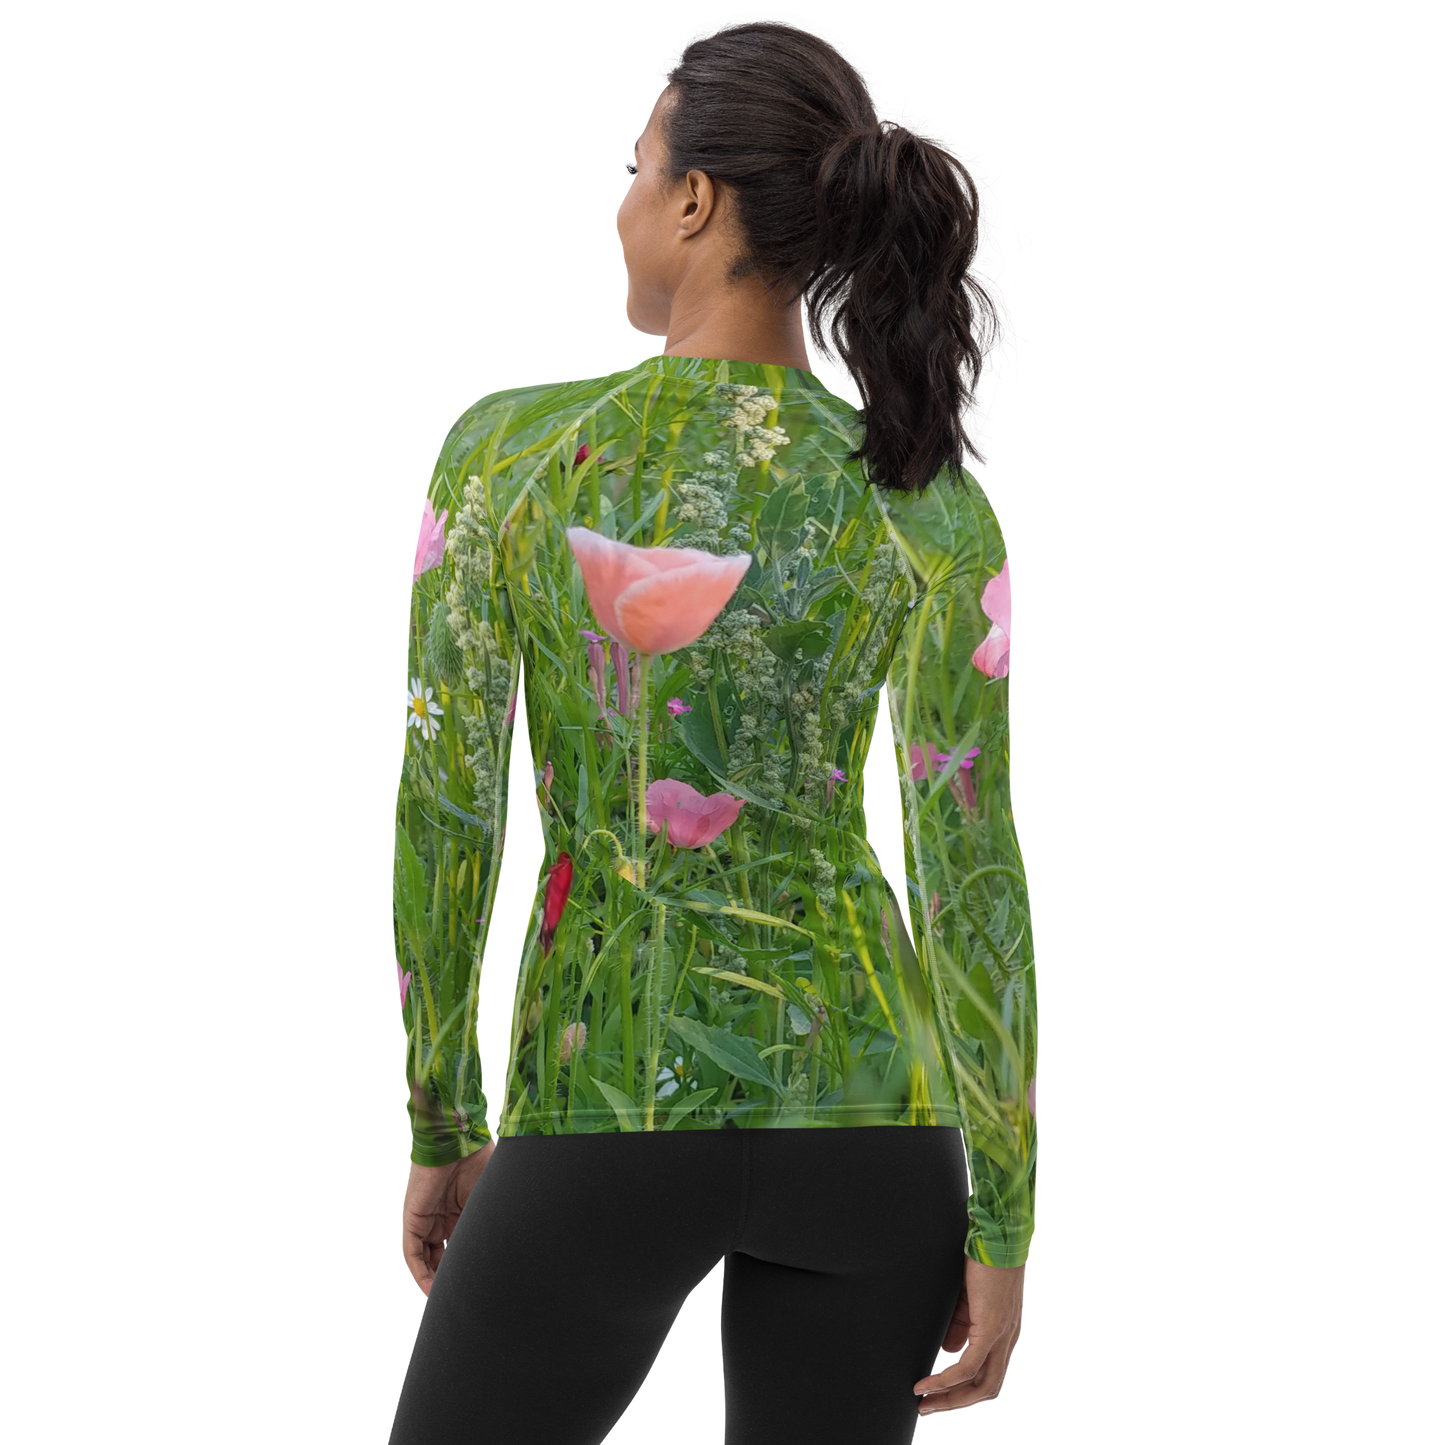 The FLOWER LOVE Collection - "Wildflower Wonder" Design Luxurious Women's Rash Guard, Sun Protective Clothing, Sports & Fitness Clothing